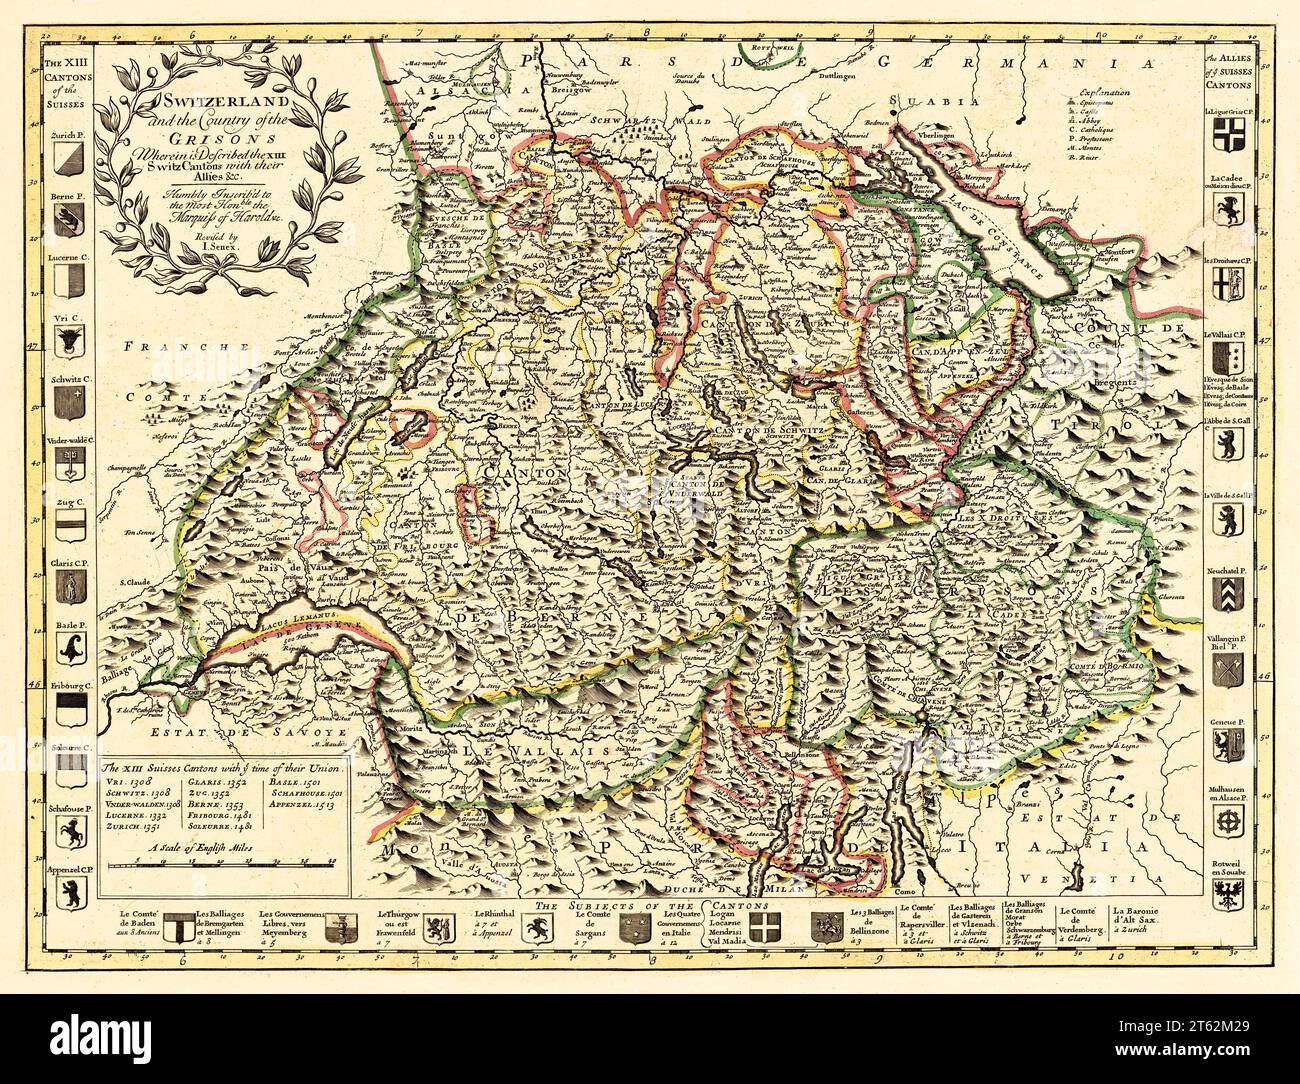 Old map of Switzerland. By Senex, publ. in London, 1721 Stock Photo